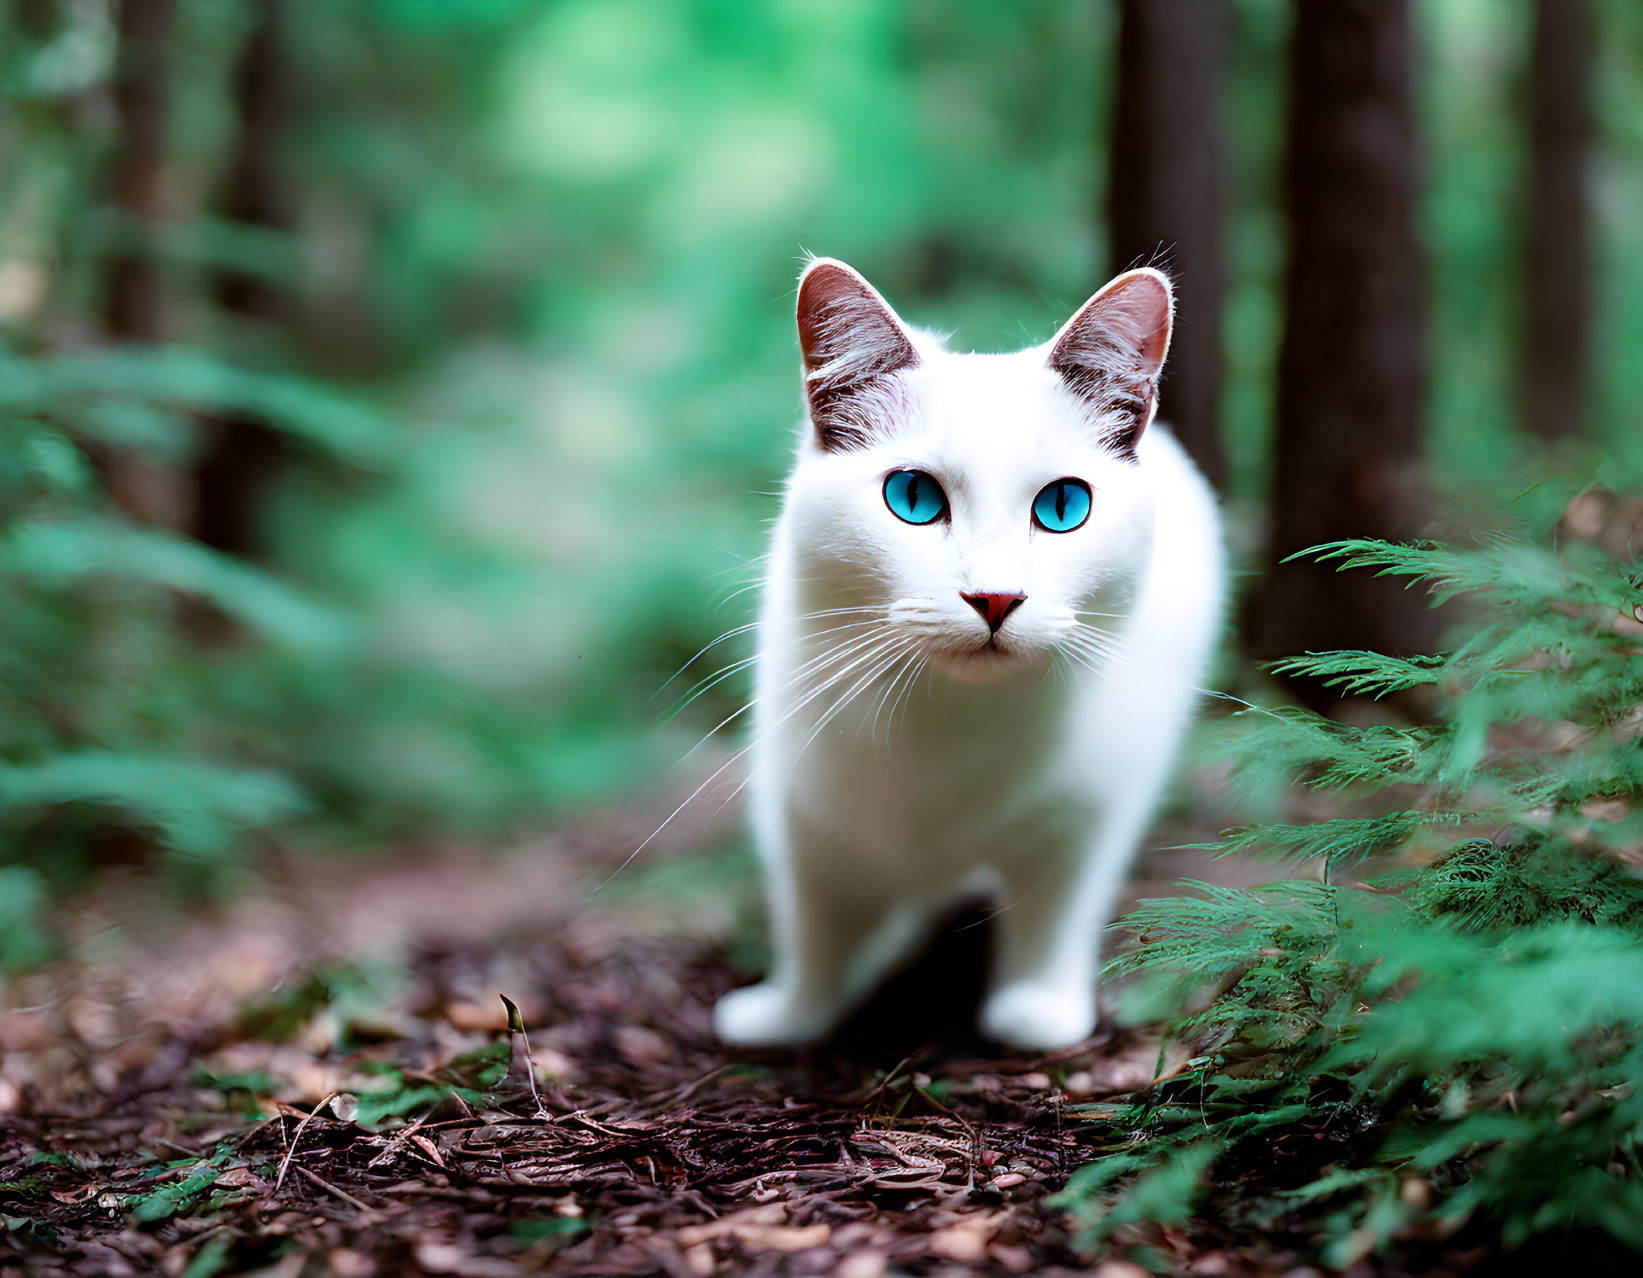 White Cat with Blue Eyes in Lush Green Forest